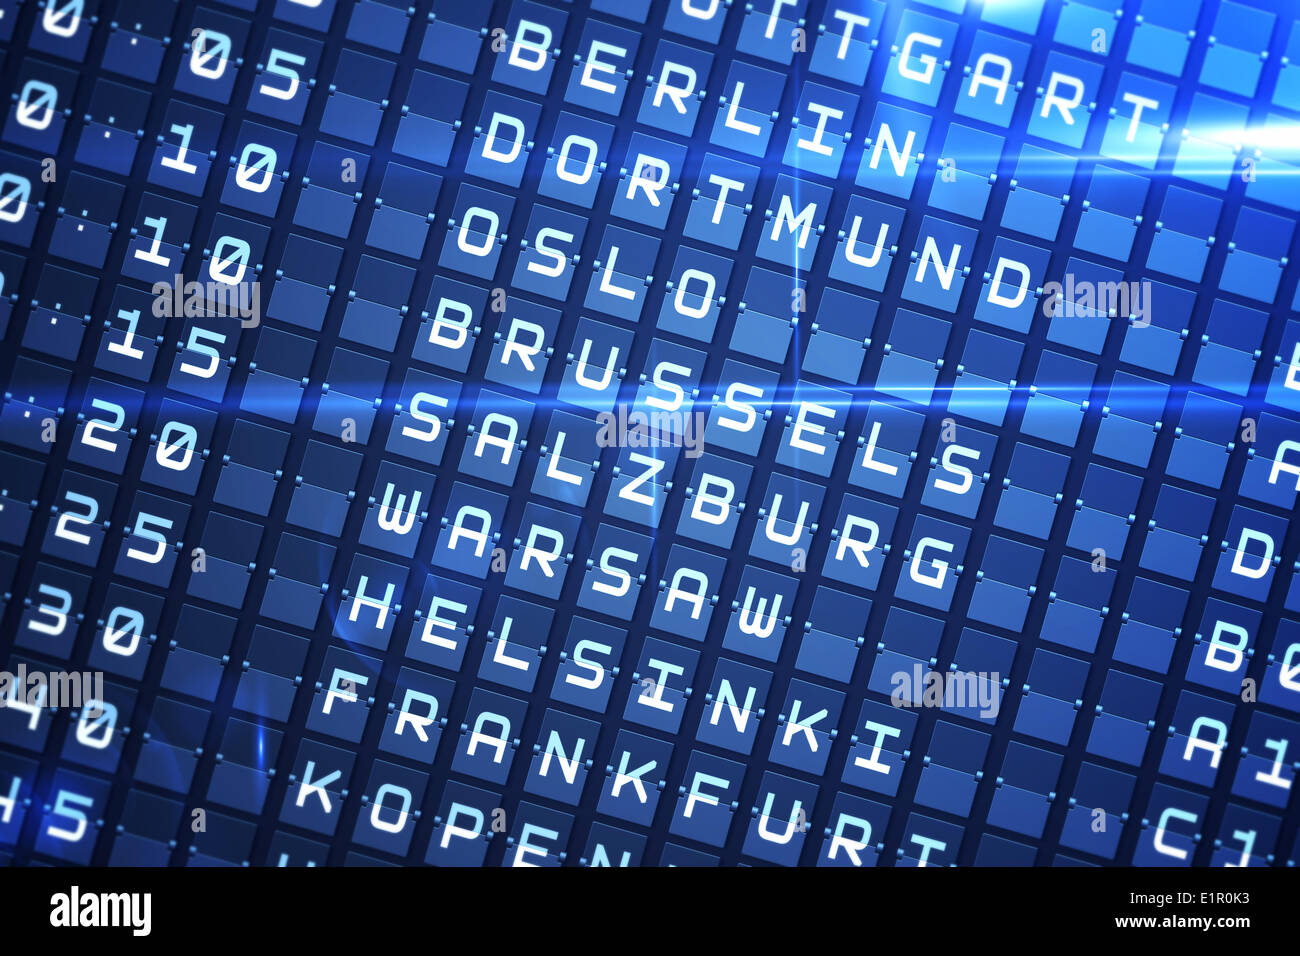 Blue departures board for major cities Stock Photo